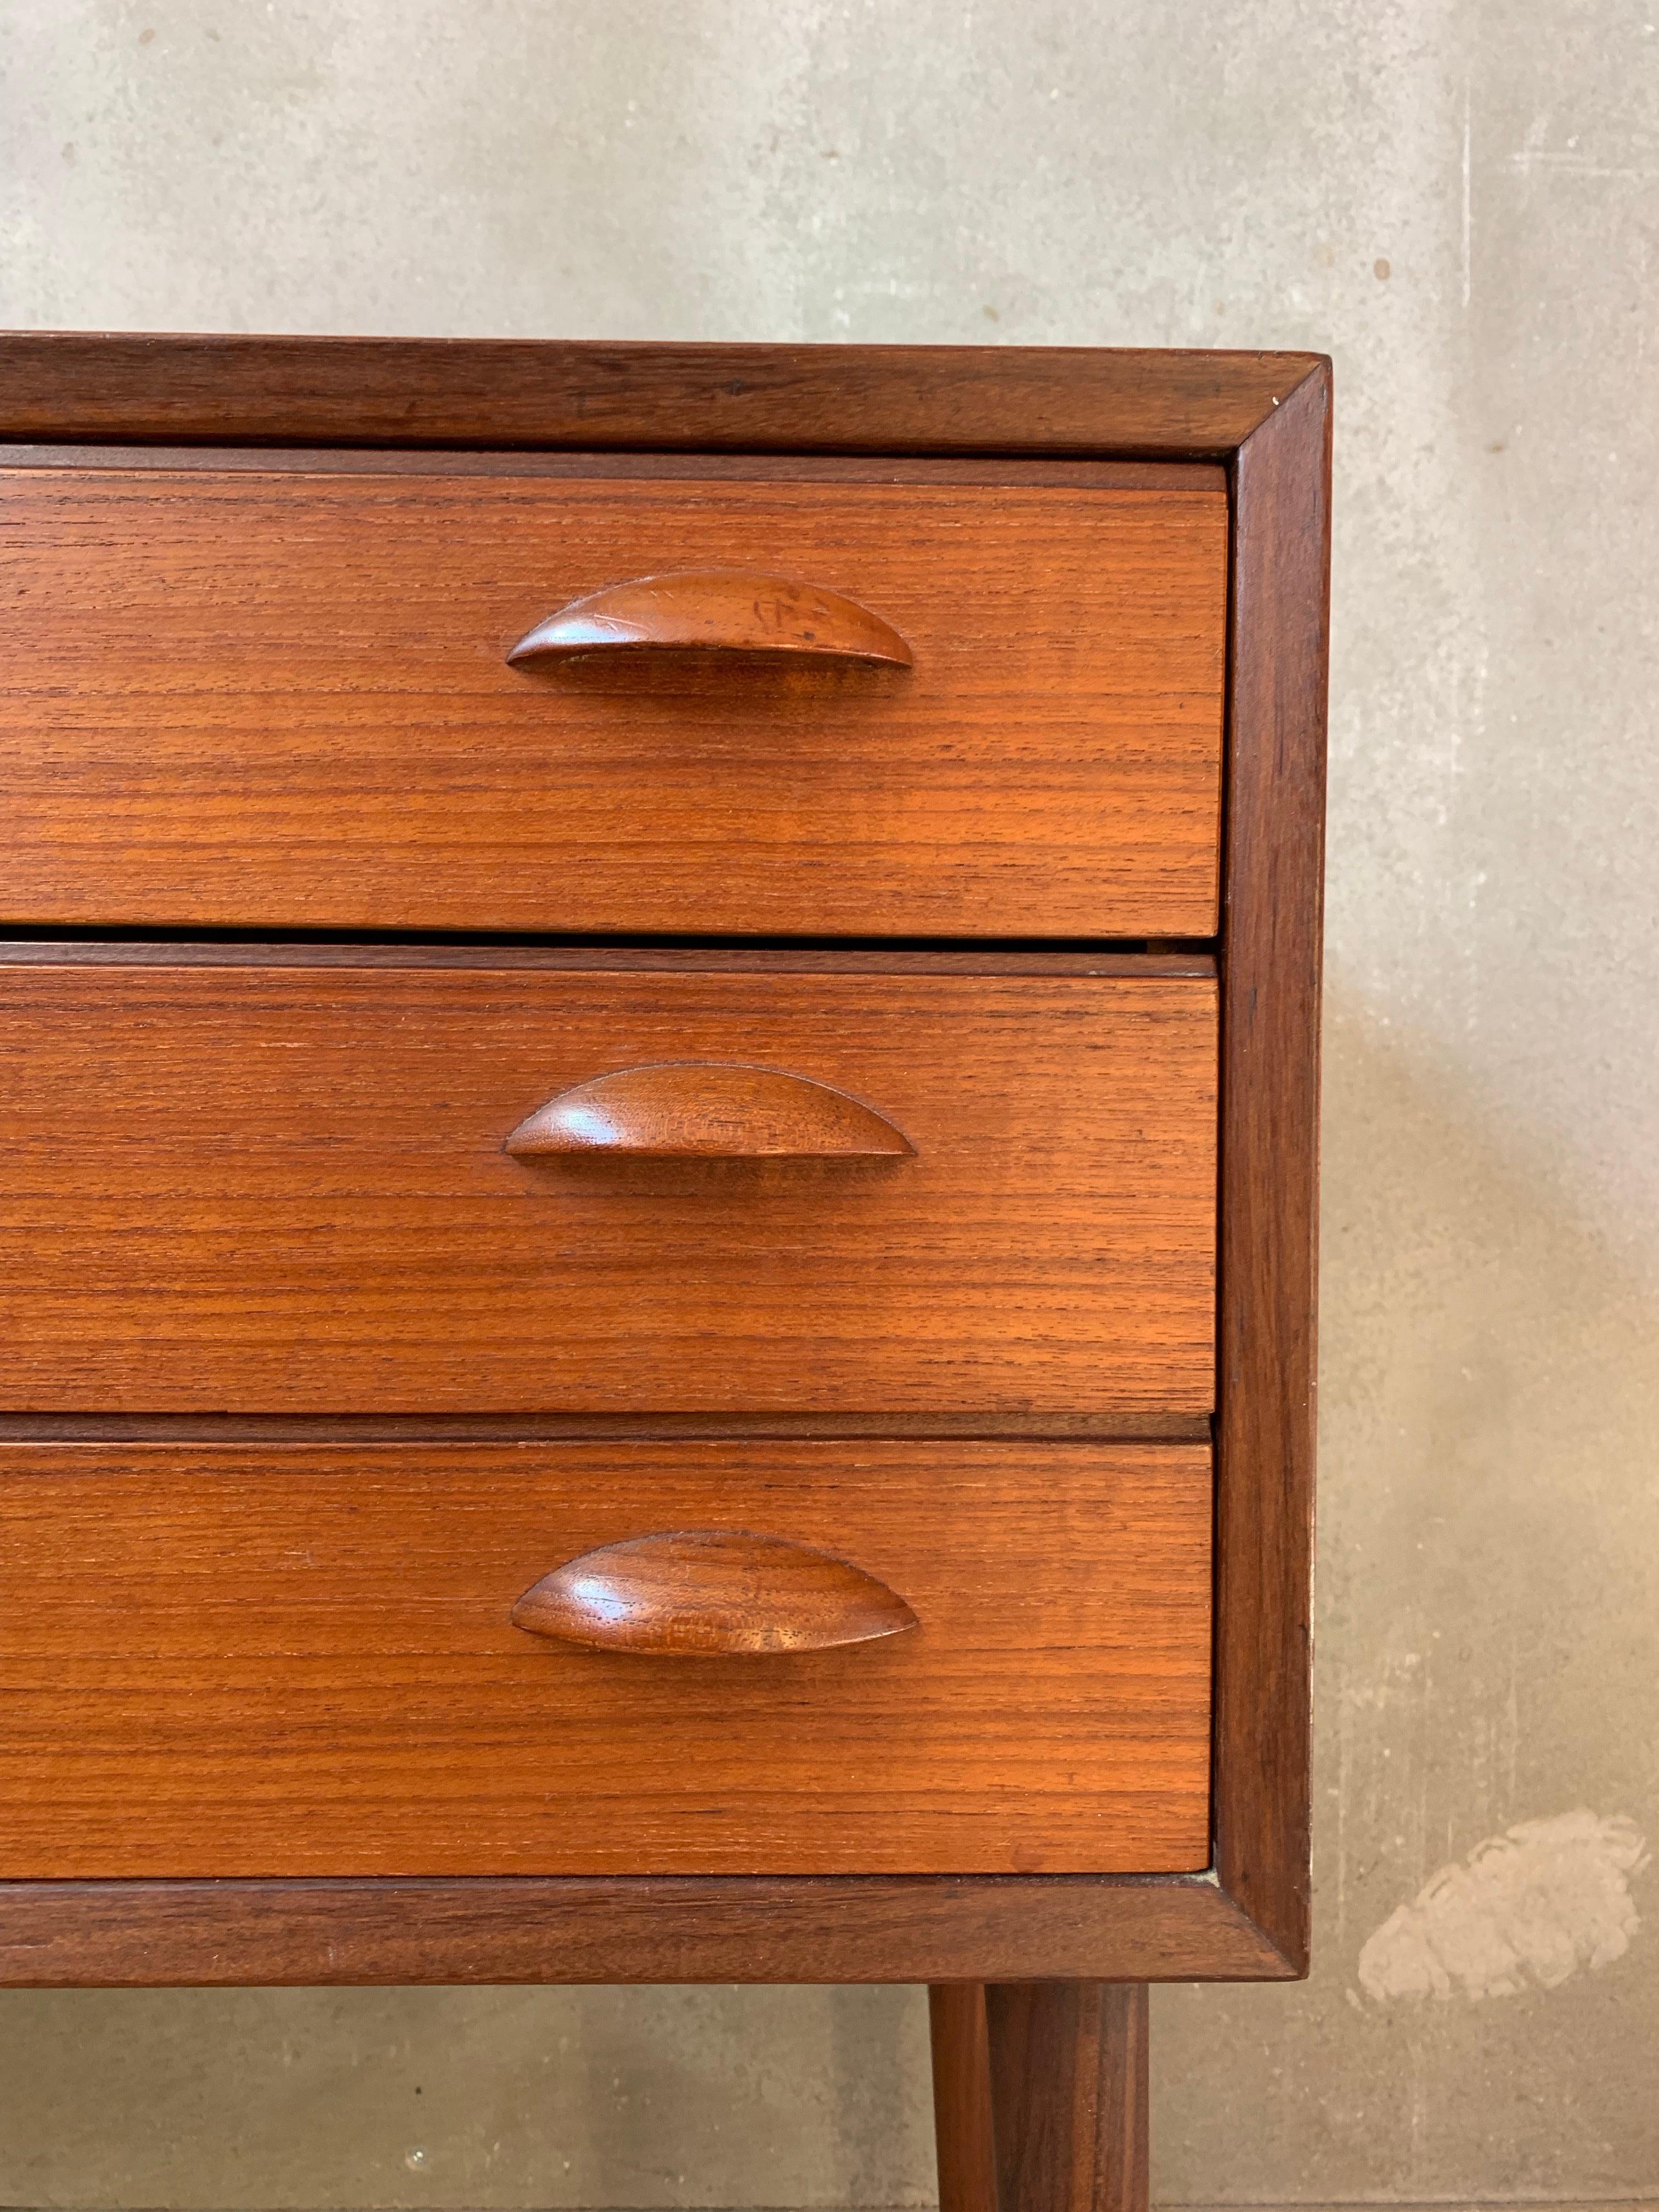 Small chest of drawers made of teak featuring three drawers and tapered legs, manufactured in Denmark, 1960s.